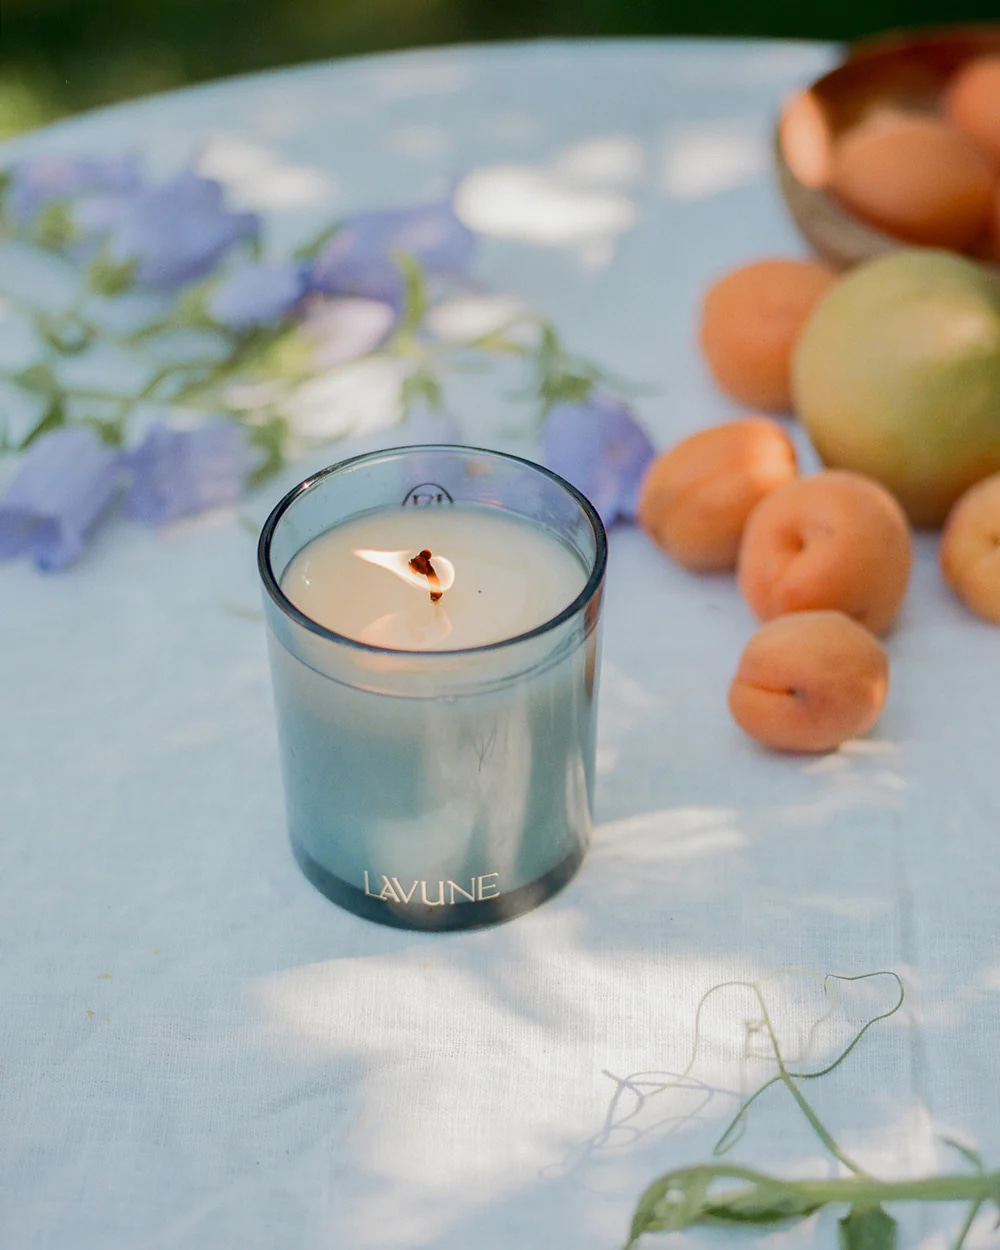 NEW CANDLE CAMPAIGN